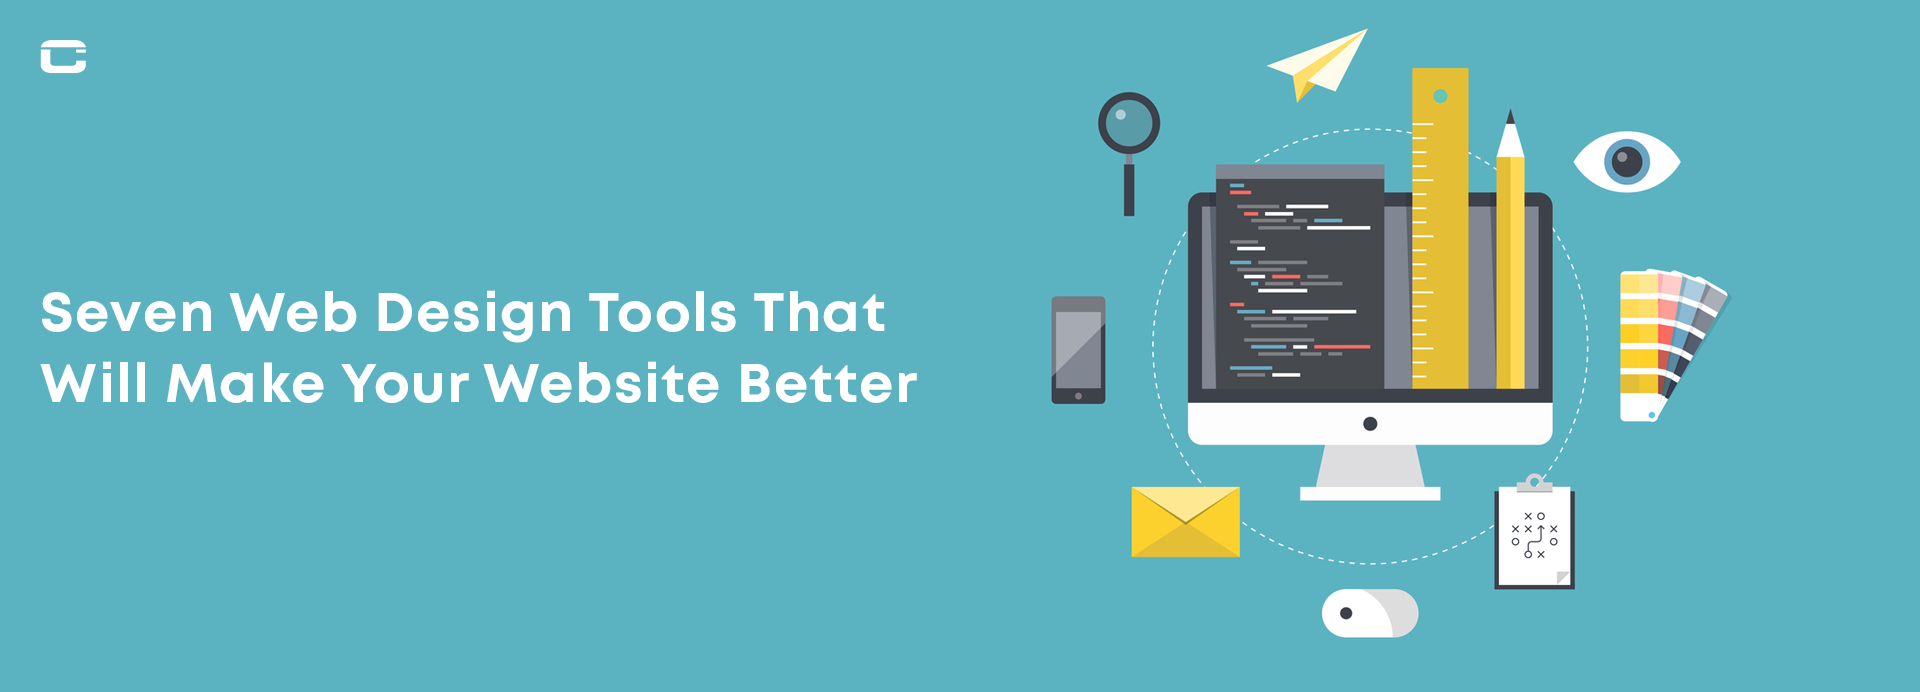 Top 7 Web Design Tools That Will Make Your Website Better